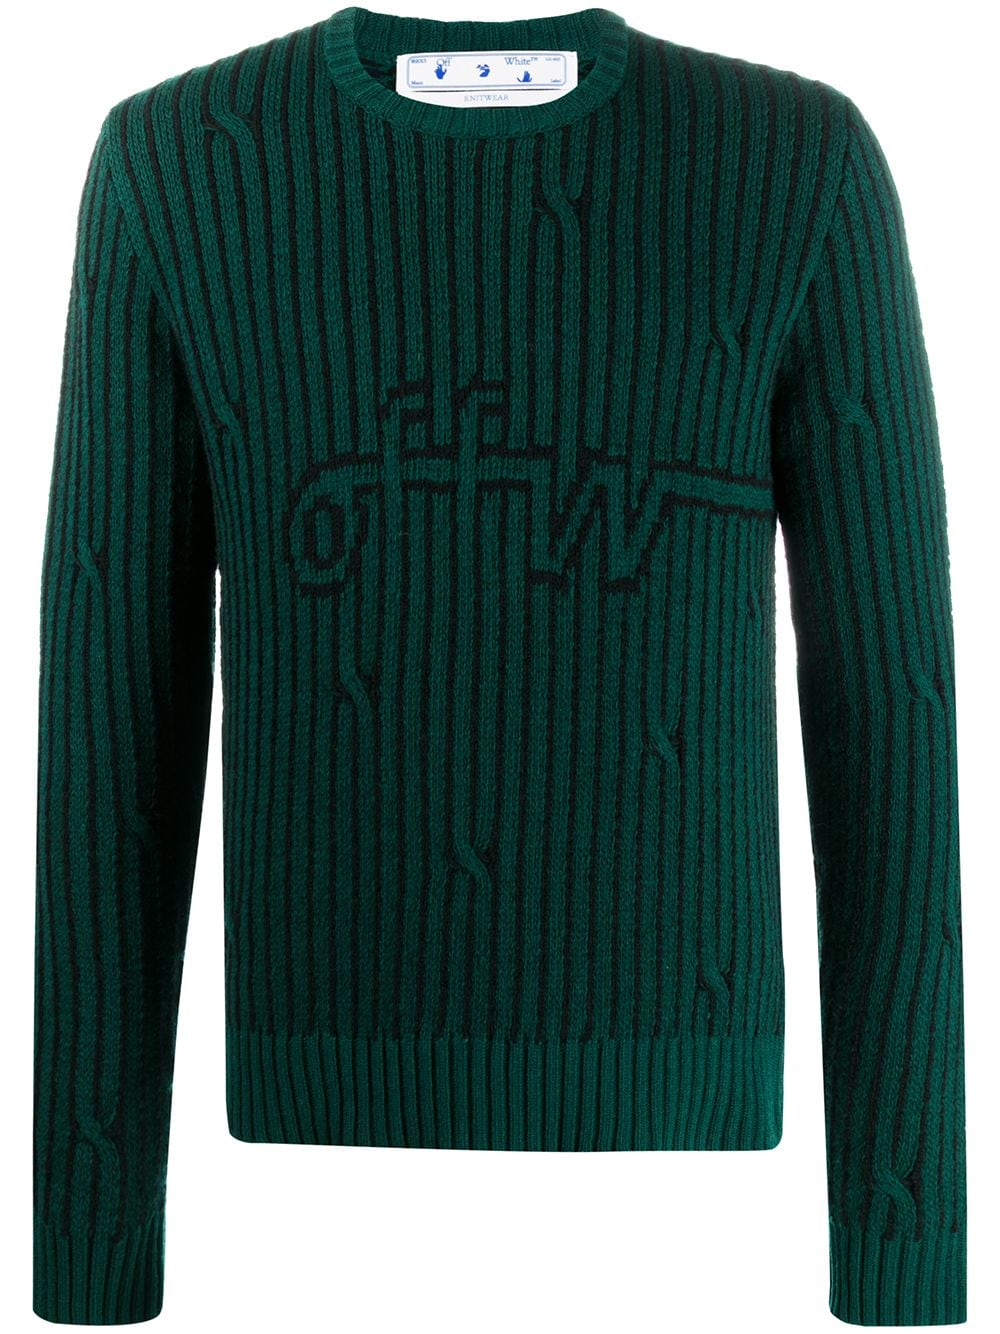 OFF-WHITE Cables Knit Sweater Dark Green Men's - FW20 - US